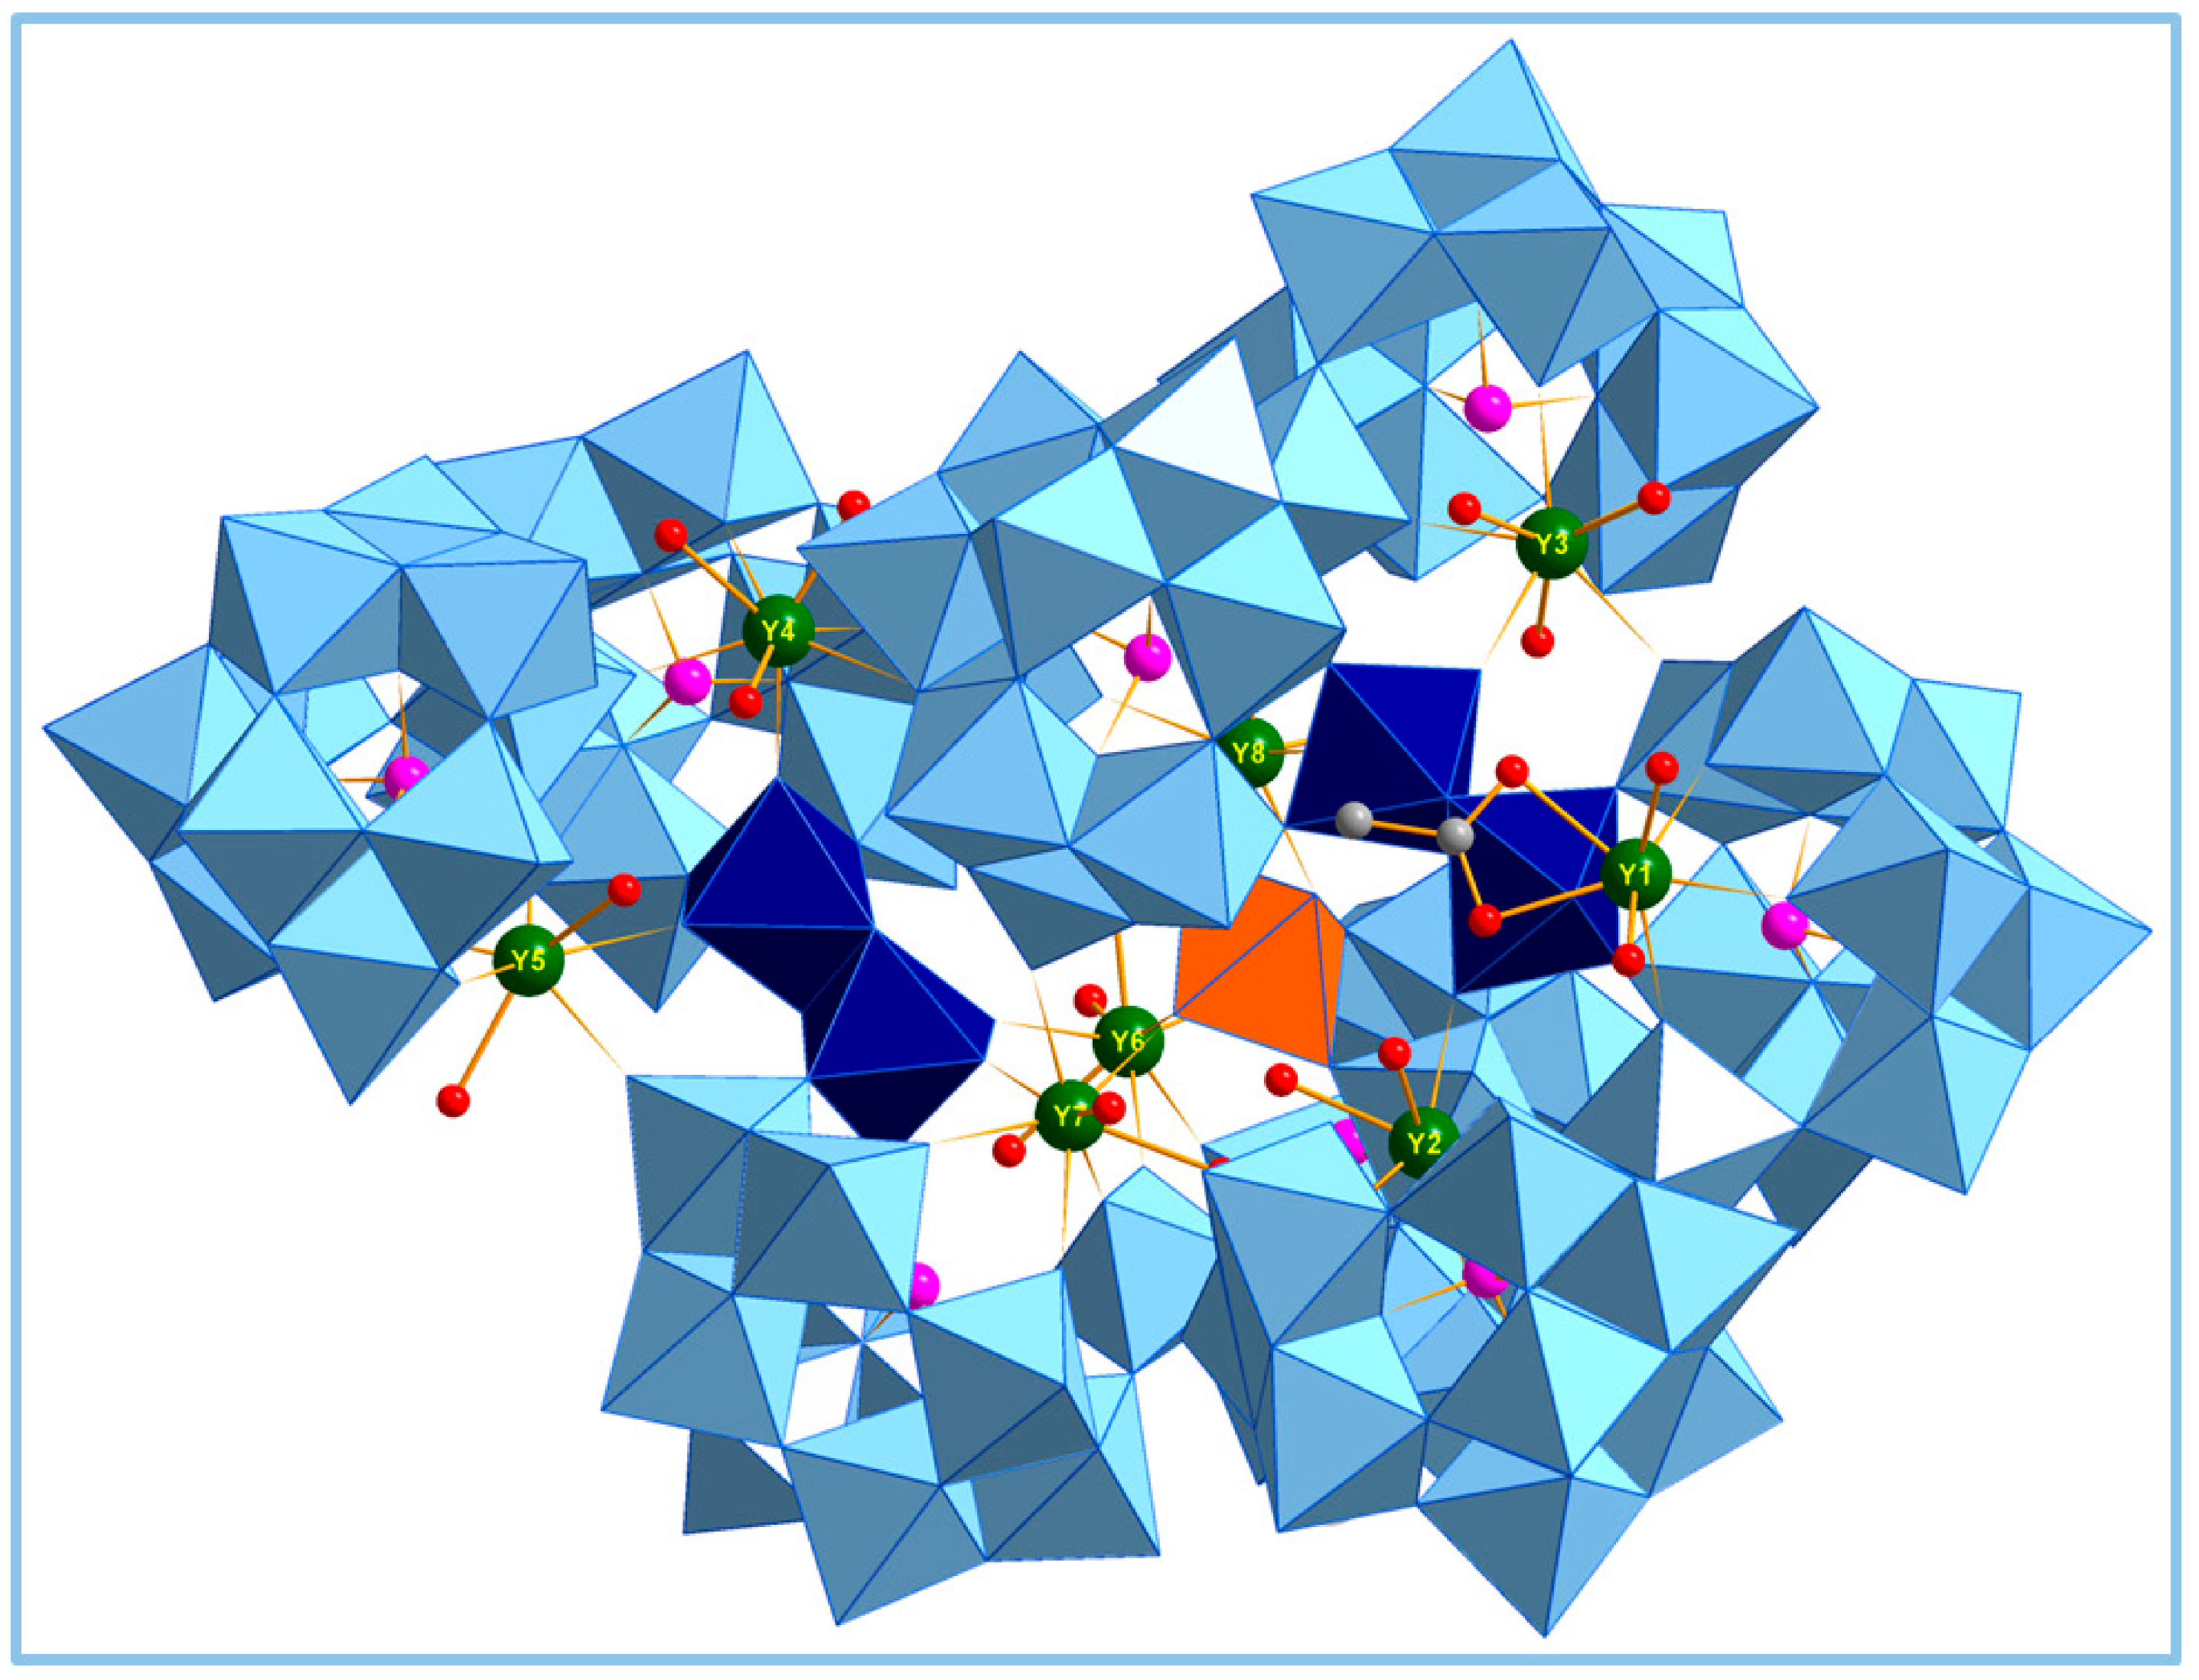 Full-Text | Synthesis and Characterization 8-Yttrium(III)-Containing 81-Tungsto-8-Arsenate(III), [Y8 (CH3COO)(H2O)18(As2W19O68)4(W2O6)2(WO4)]43−